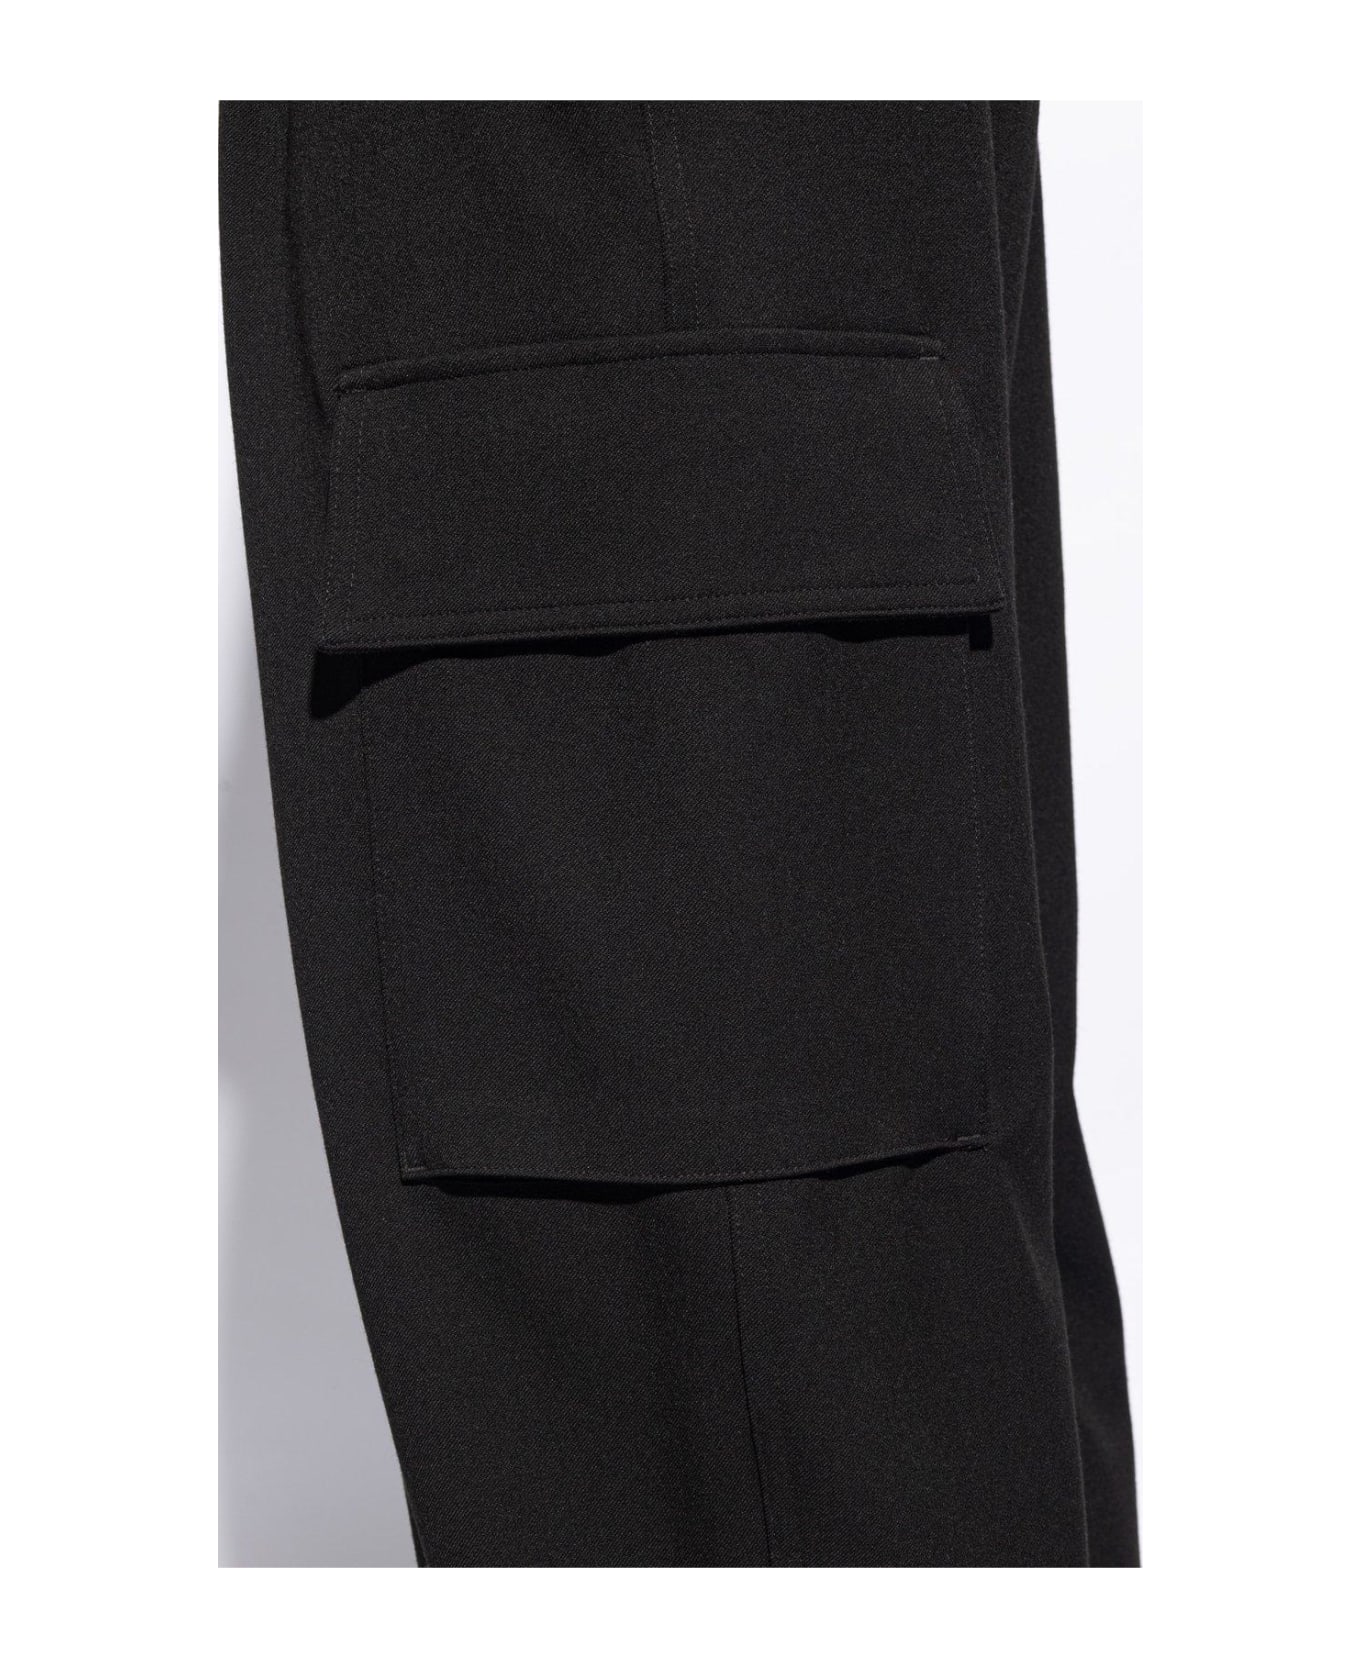 Emporio Armani Trousers With Pockets - Black ボトムス